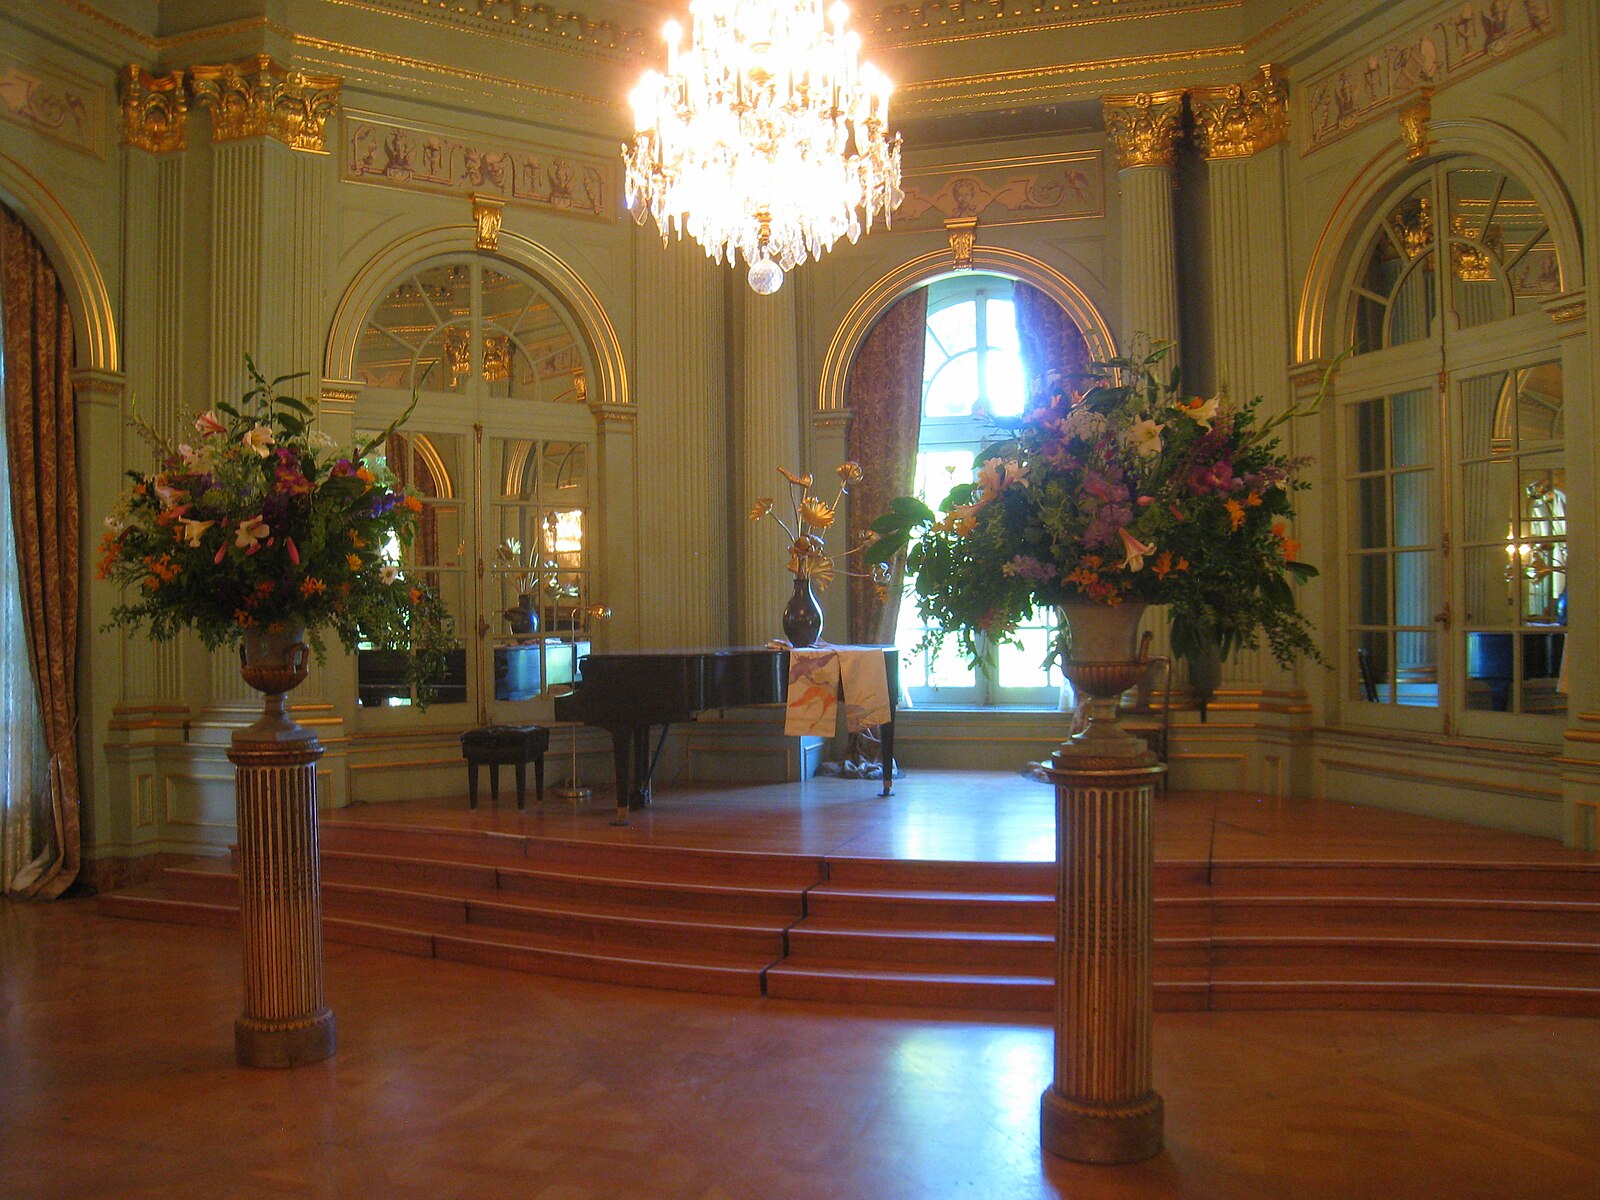 A piano atop a small stair case in an Victorian era interior that includes large mirrors and two large bouquets of flowers on pedestal, and a chandelier in the center of the room.